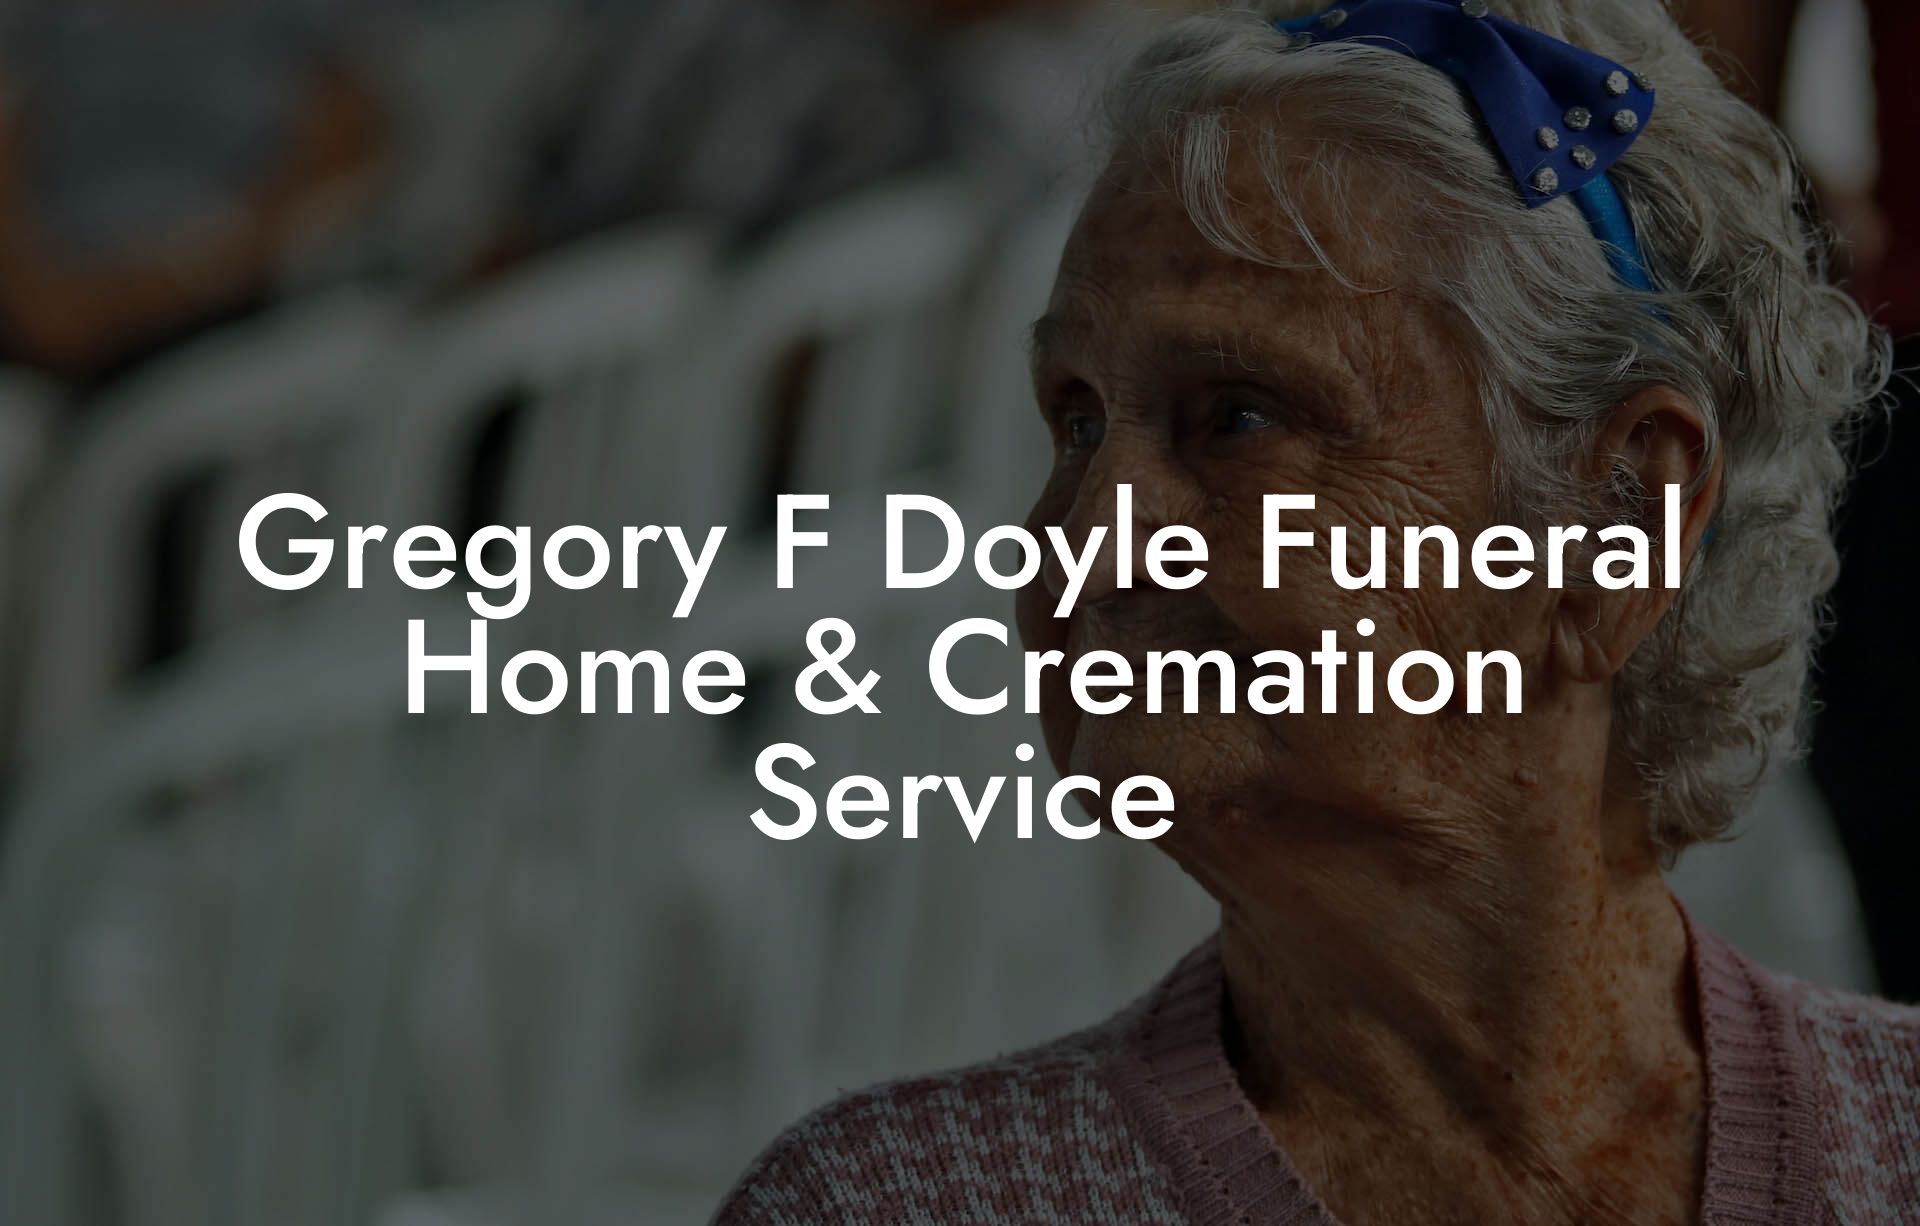 Gregory F Doyle Funeral Home & Cremation Service